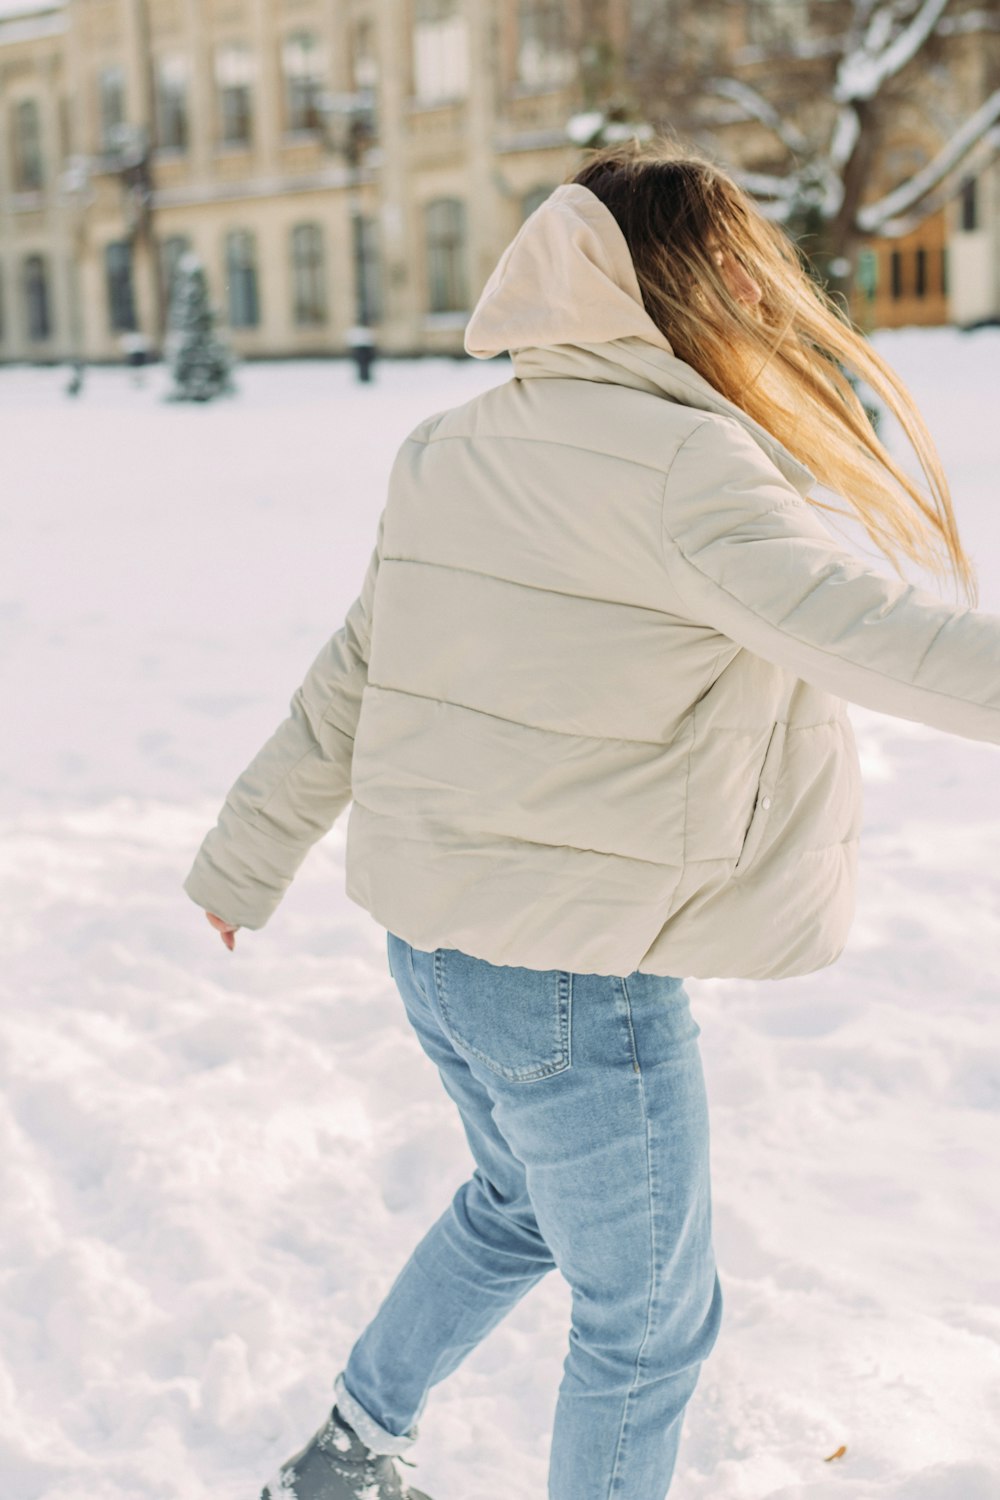 woman in white jacket and blue denim jeans standing on snow covered ground  during daytime photo – Free Grey Image on Unsplash